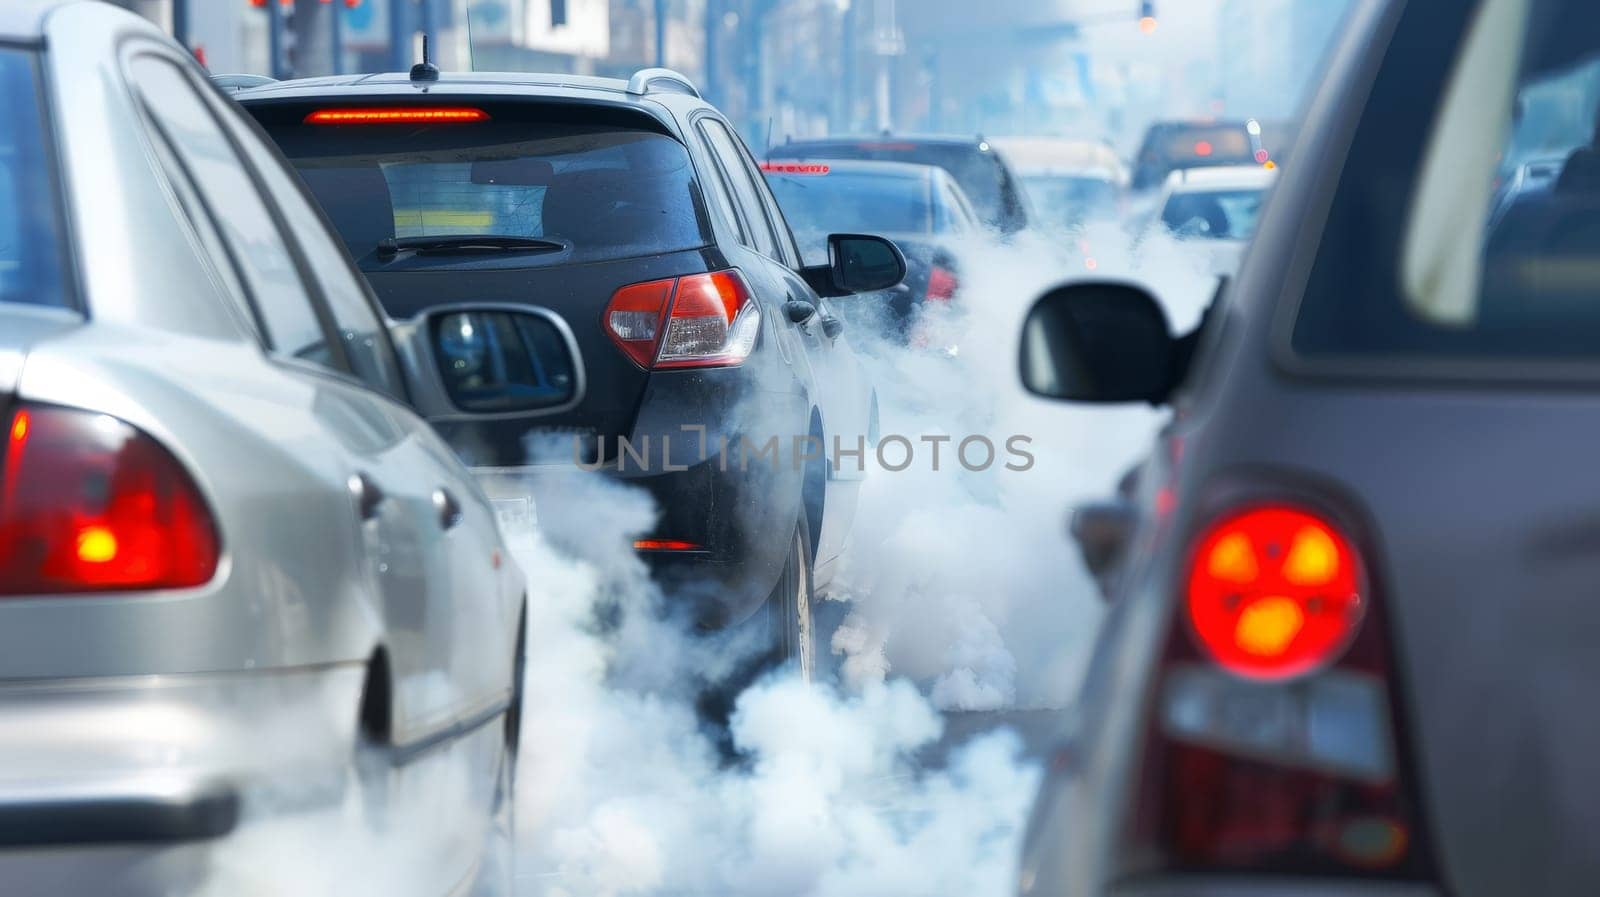 combustion fumes coming out of car exhaust pipe, exhaust fumes come out of the car on the road.